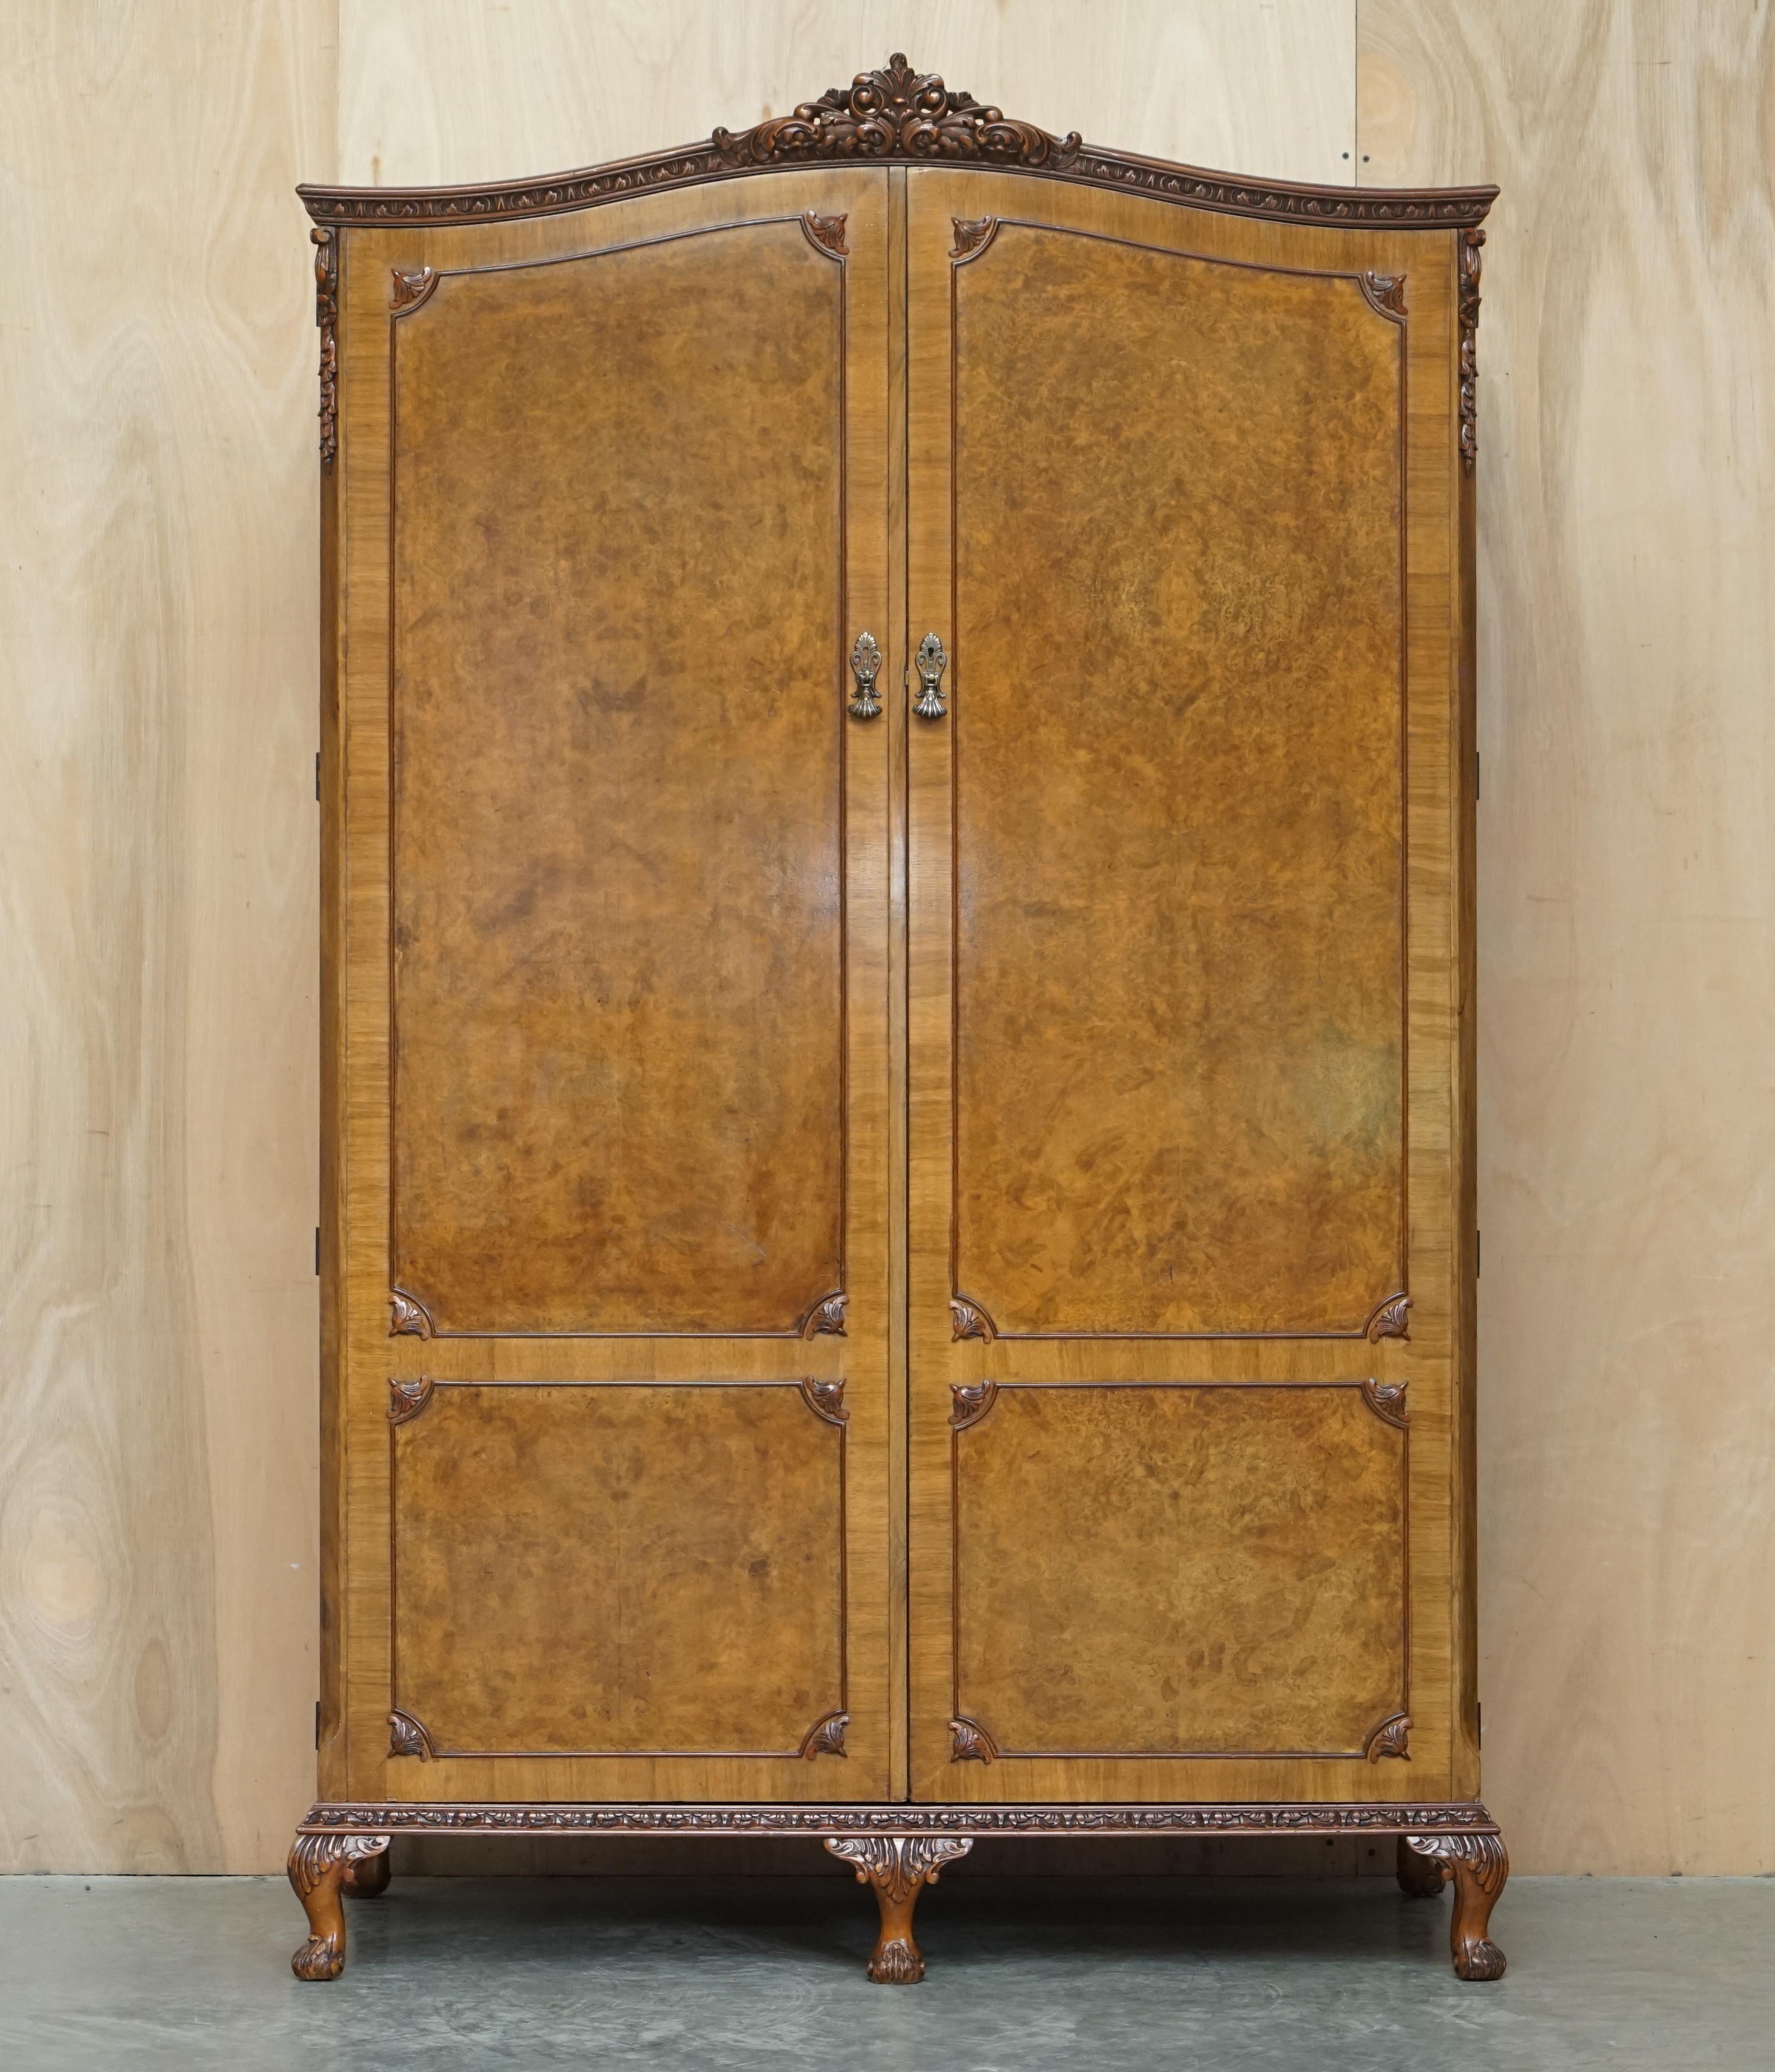 We are delighted to offer for sale this stunning, original circa 1940’s Art Deco, Maple & Co, large double Wardrobe which is part of a suite

As mentioned this piece is part of a suite, in total I have a large double wardrobe, the dressing table